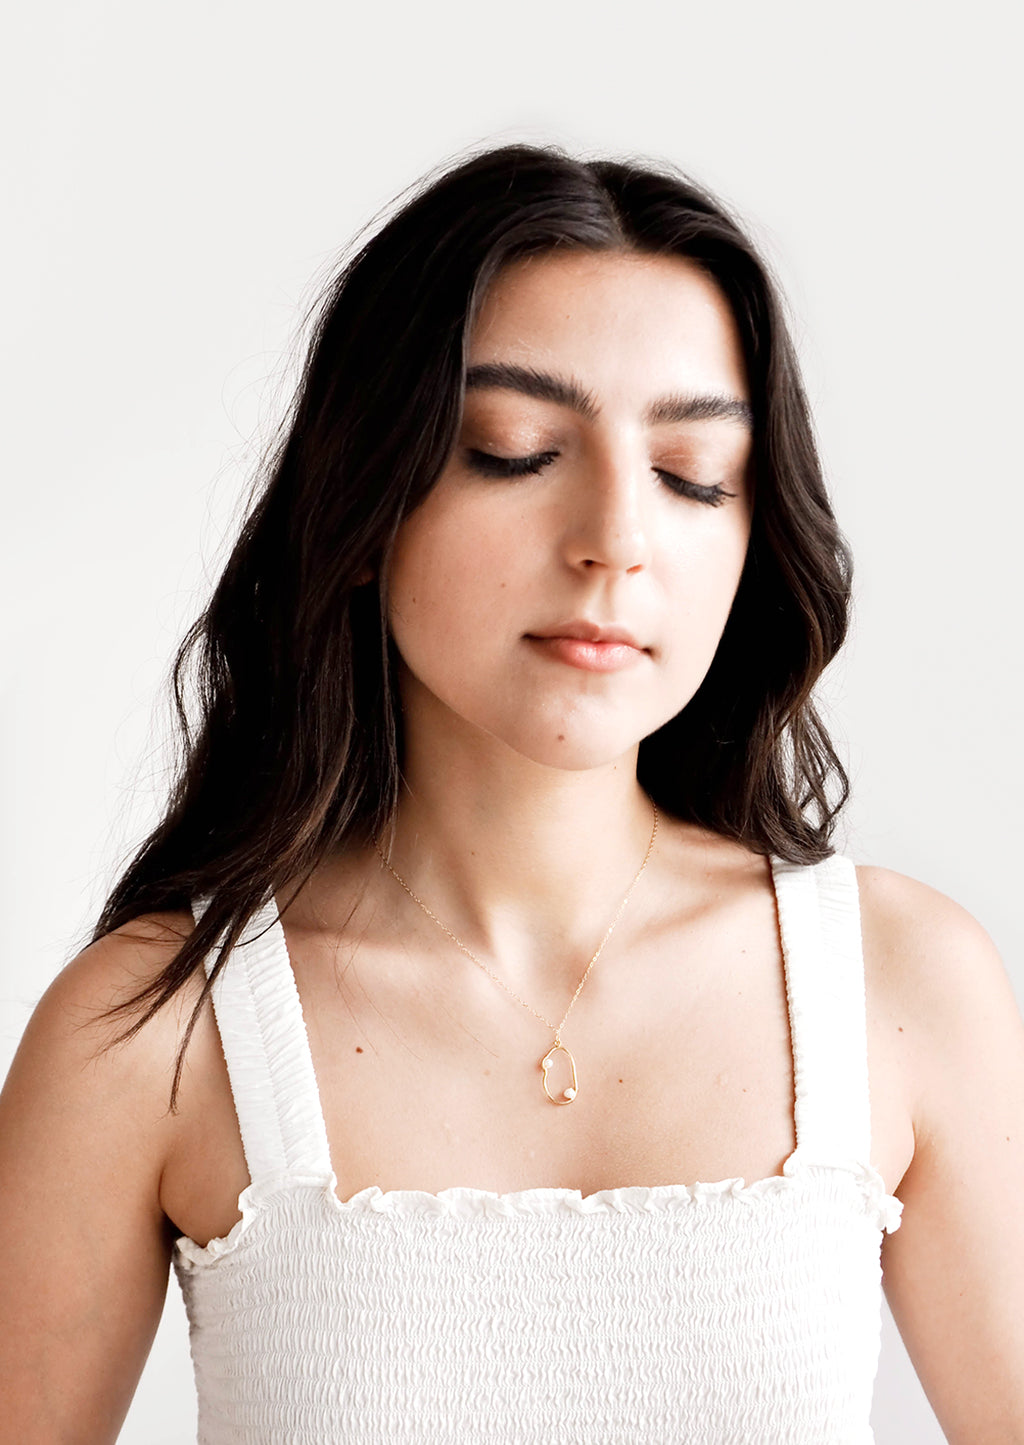 2: Model shot showing woman wearing necklace and white top.